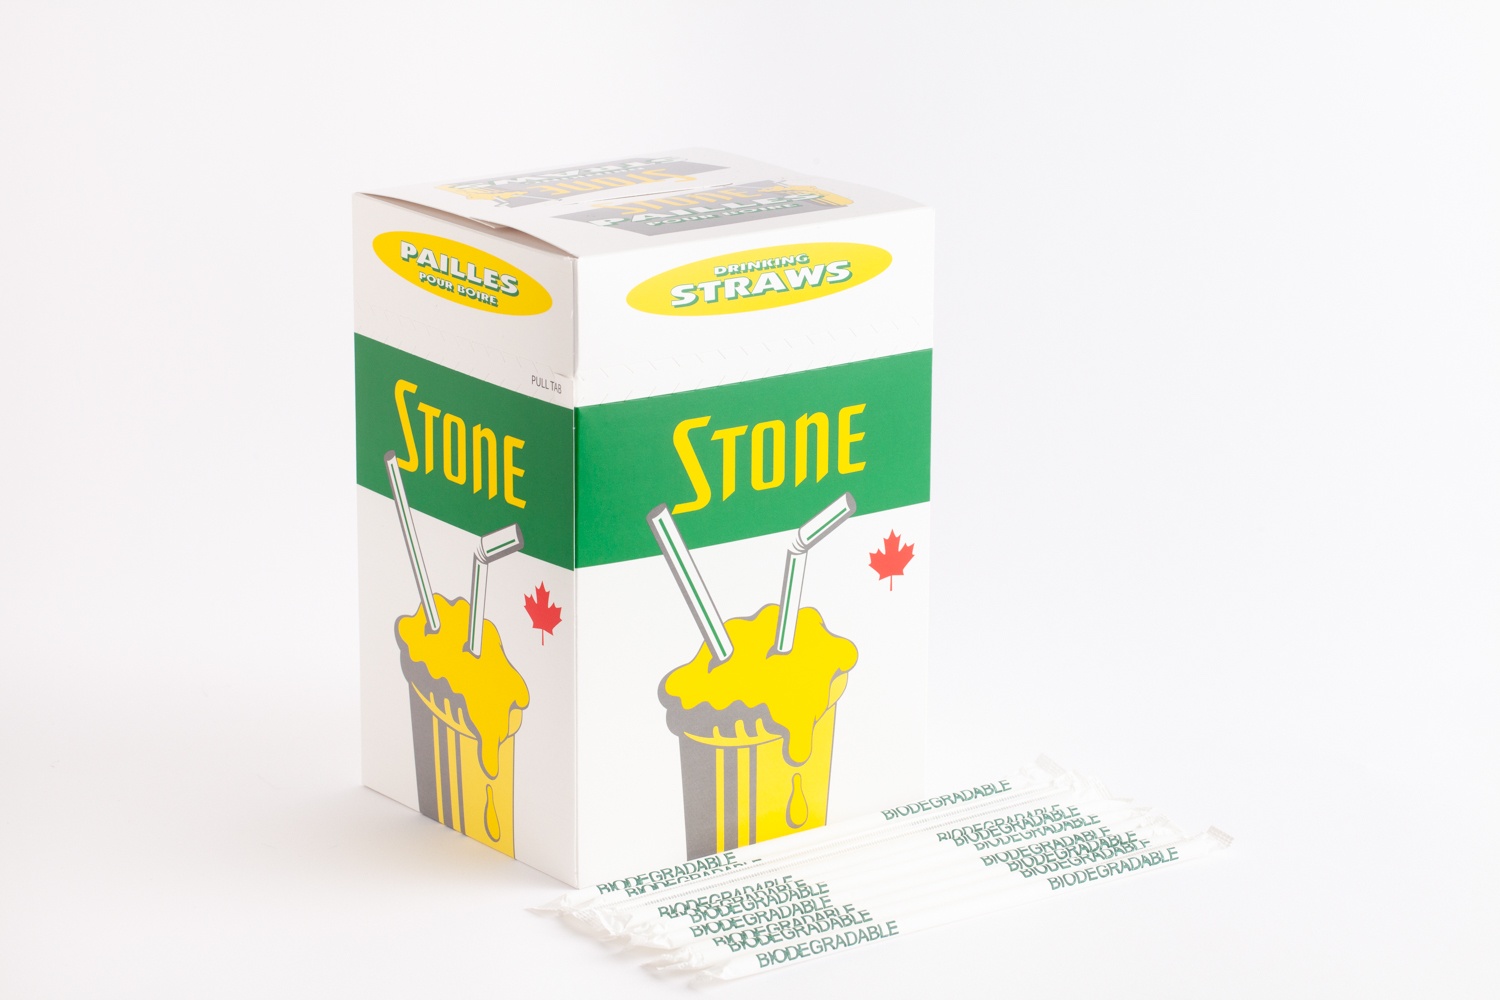 product image stone straw box green wrapped straws biodegradable